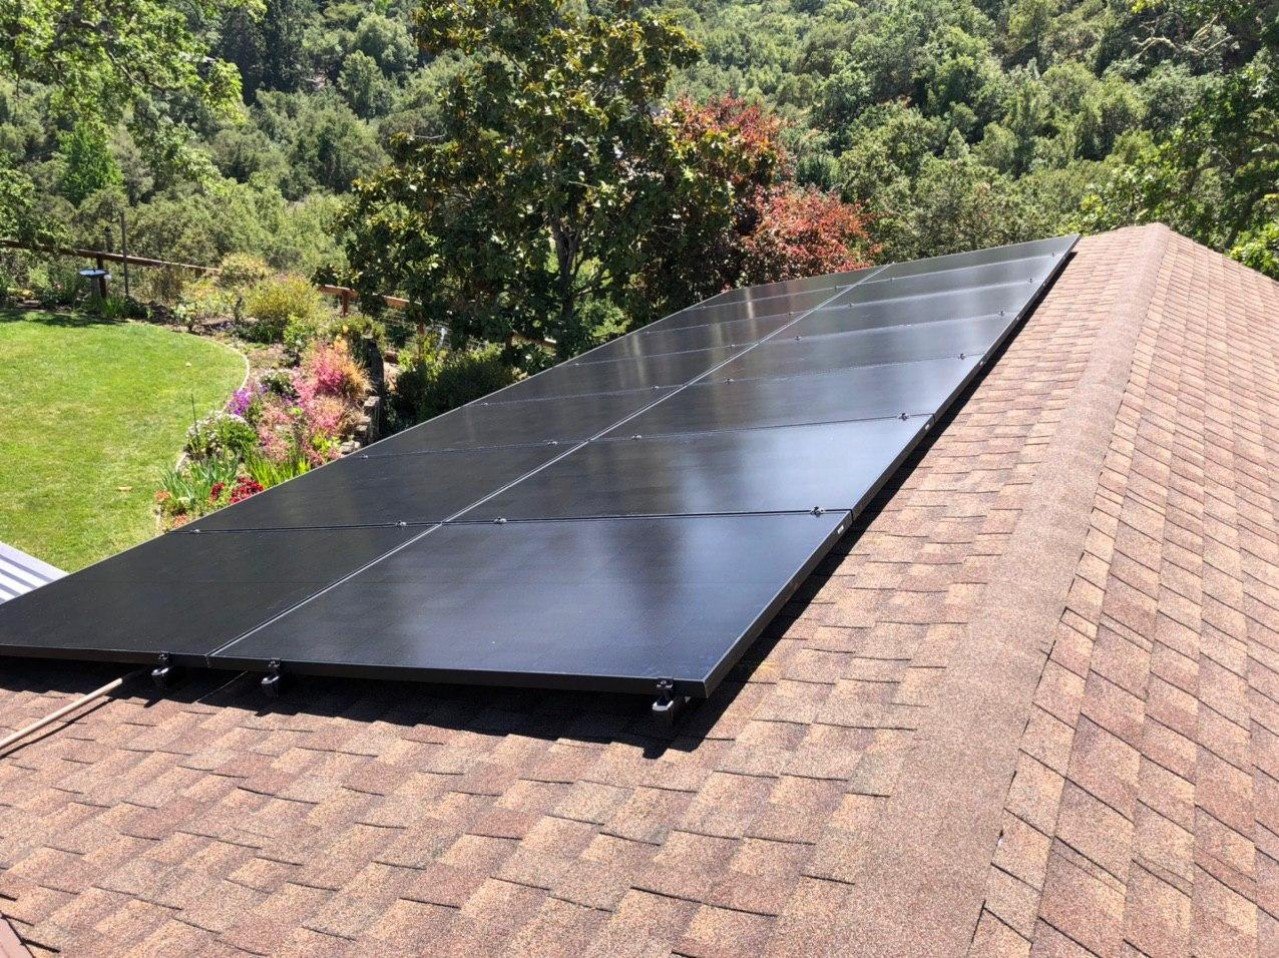 Clean Install of Solaria Panels on Orinda Home